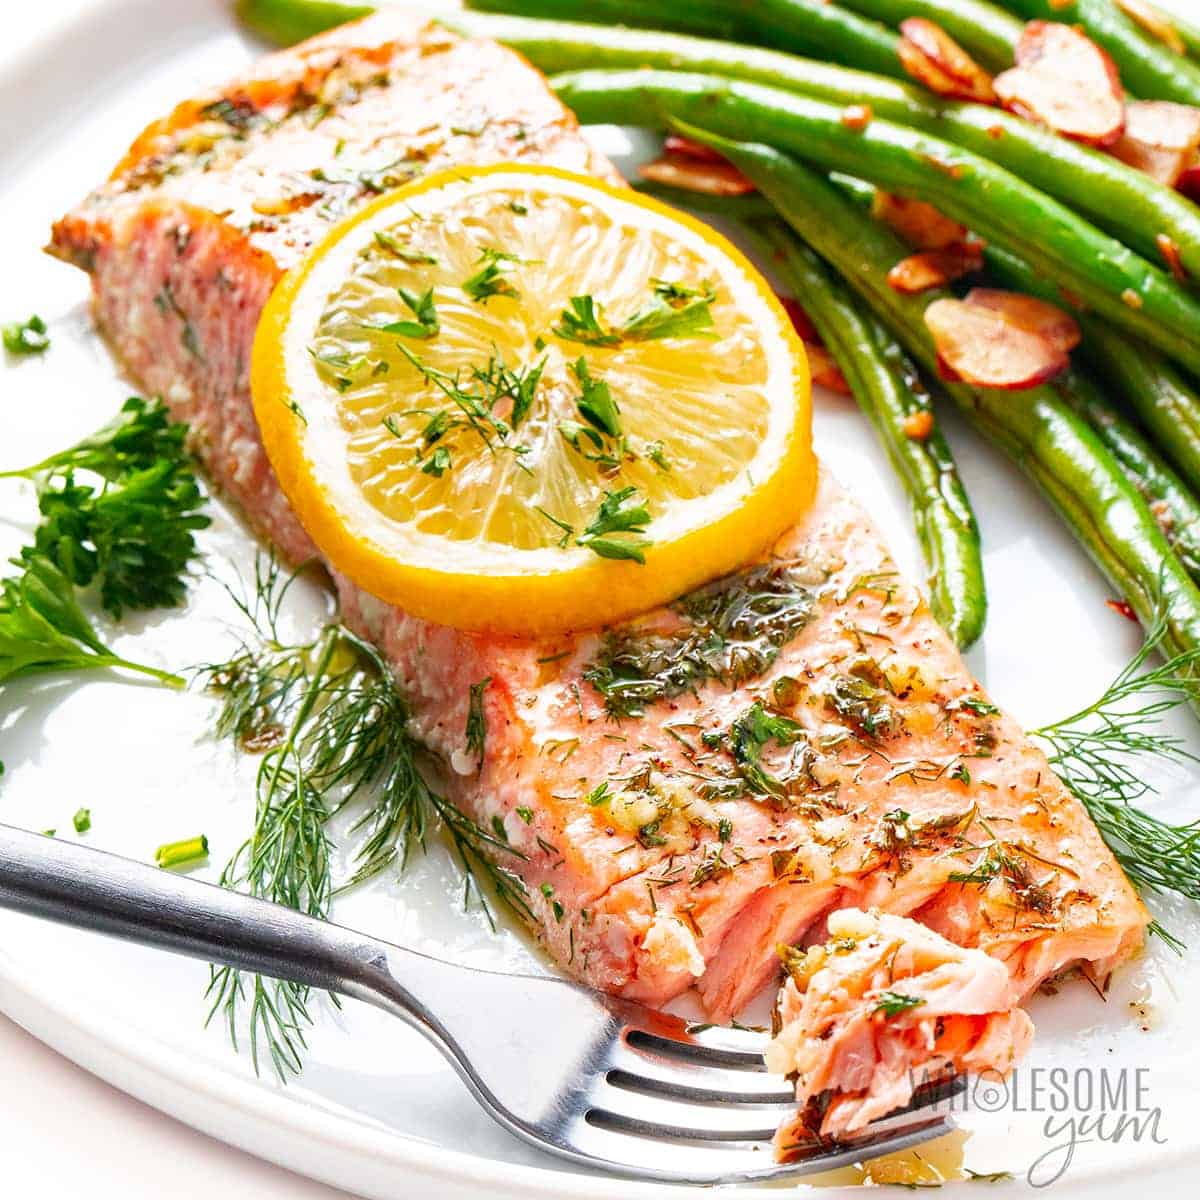 Baked salmon on a plate garnished with lemon and fresh spices.